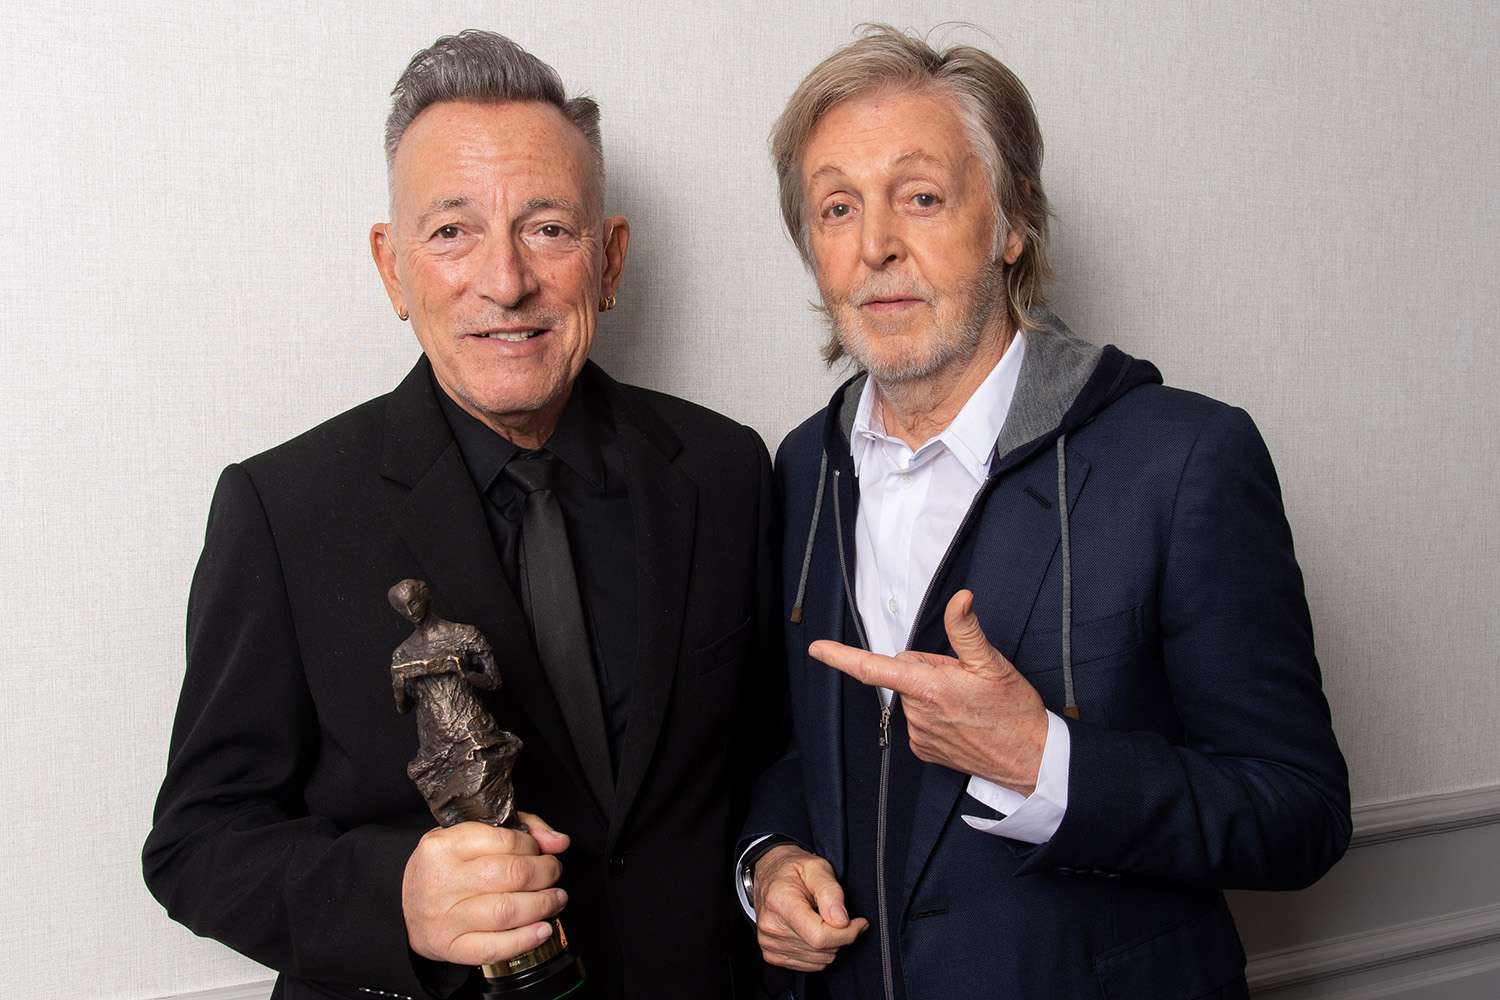 Paul McCartney Roasts Bruce Springsteen at Awards Show: 'He's Never Worked a Day in His Life'